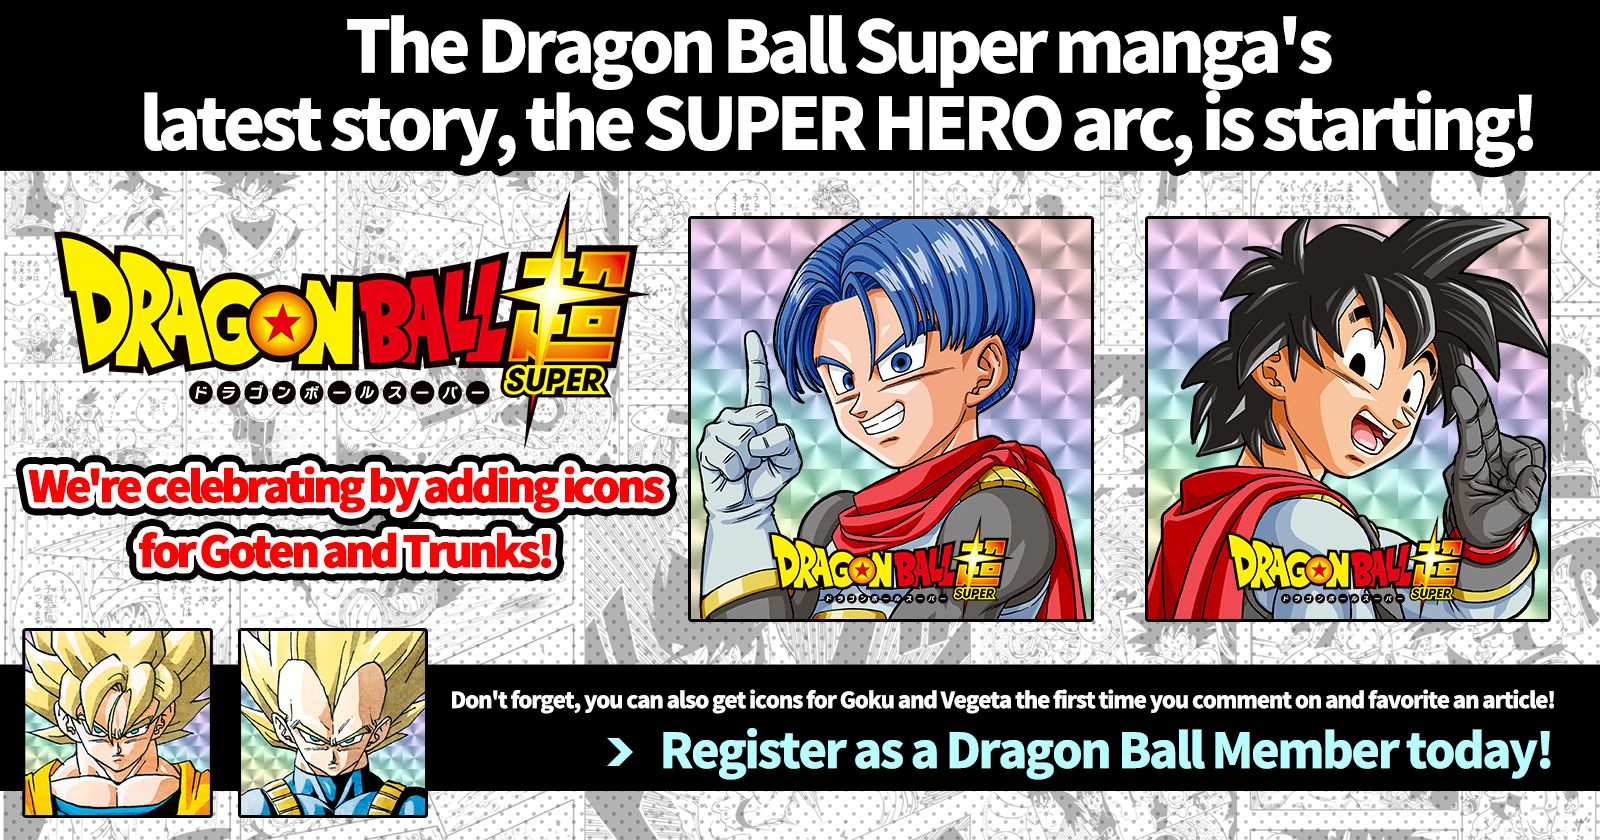 Celebrating the Start of the Manga's Newest Story! Trunks and Goten Profile Icons Added!